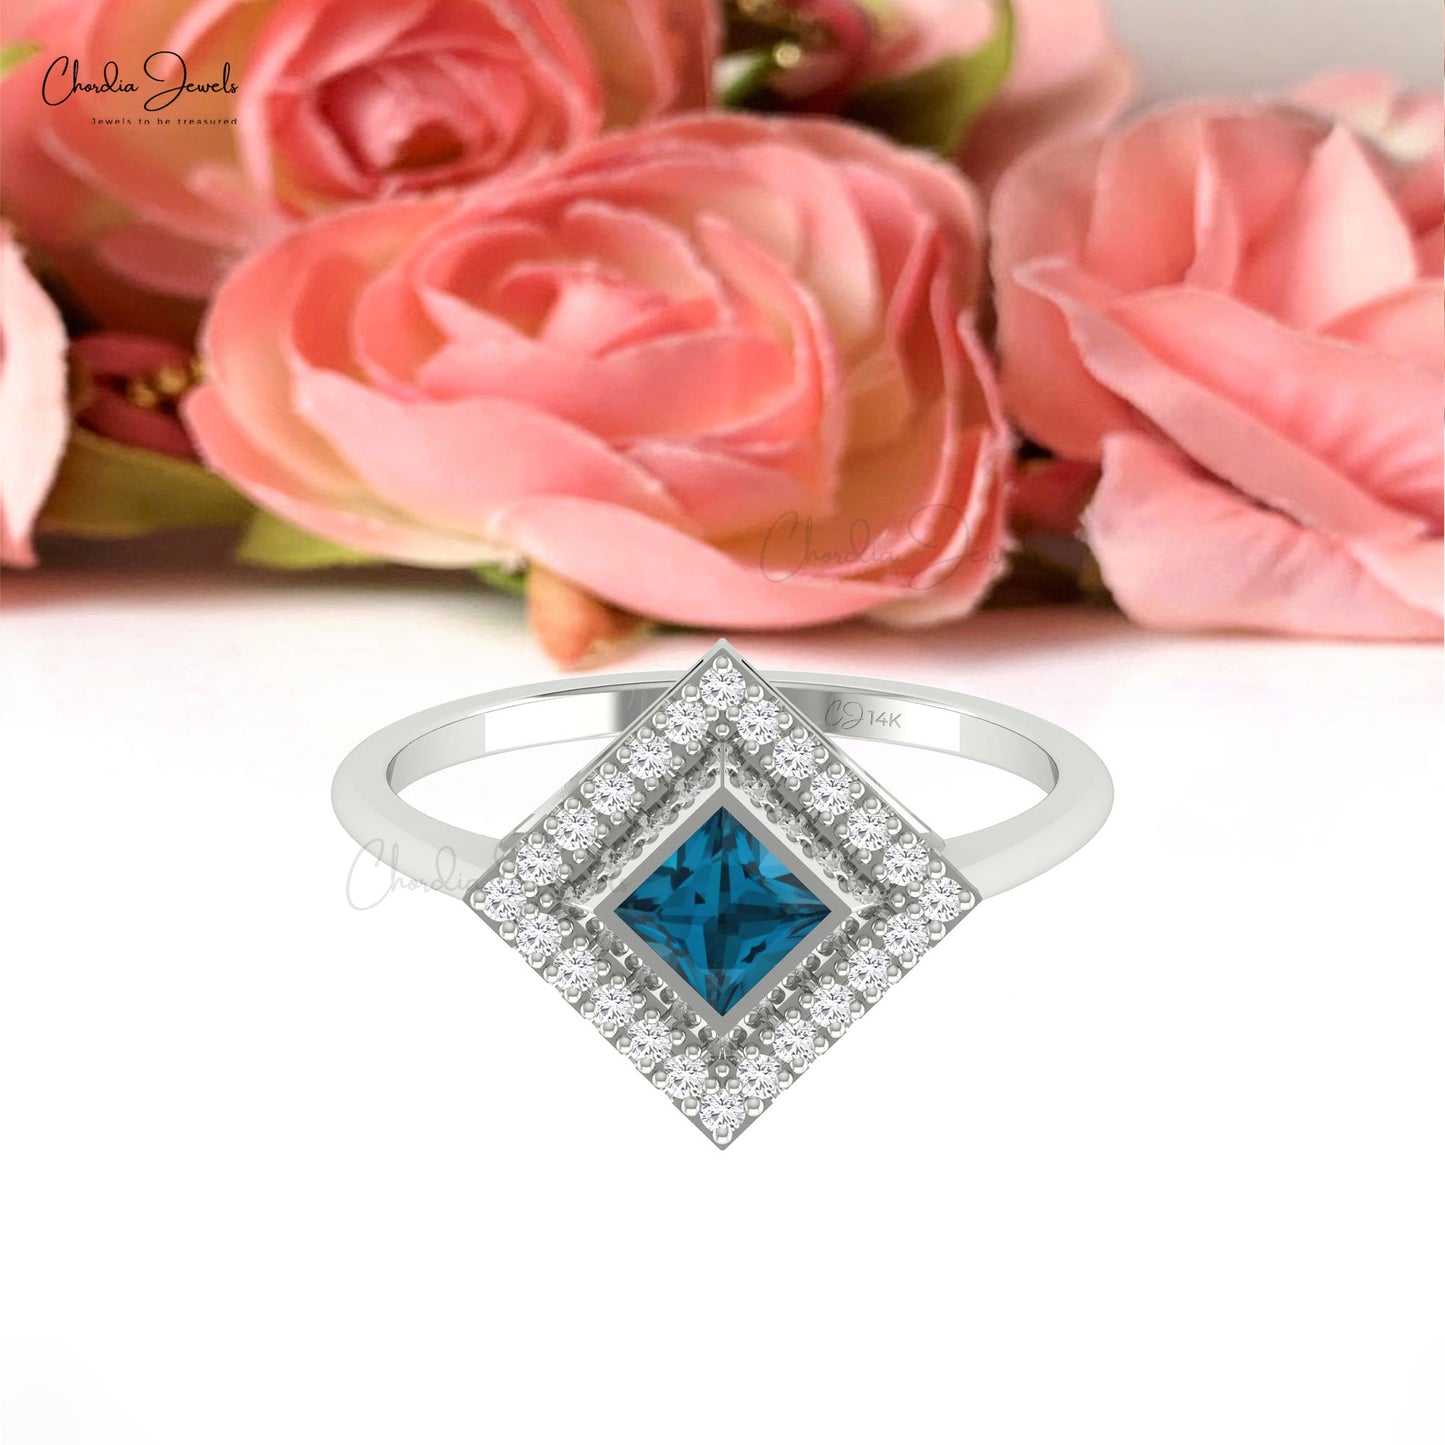 Dainty Halo Ring With London Blue Topaz & Diamond Accents 14k Real Gold Light Weight Ring